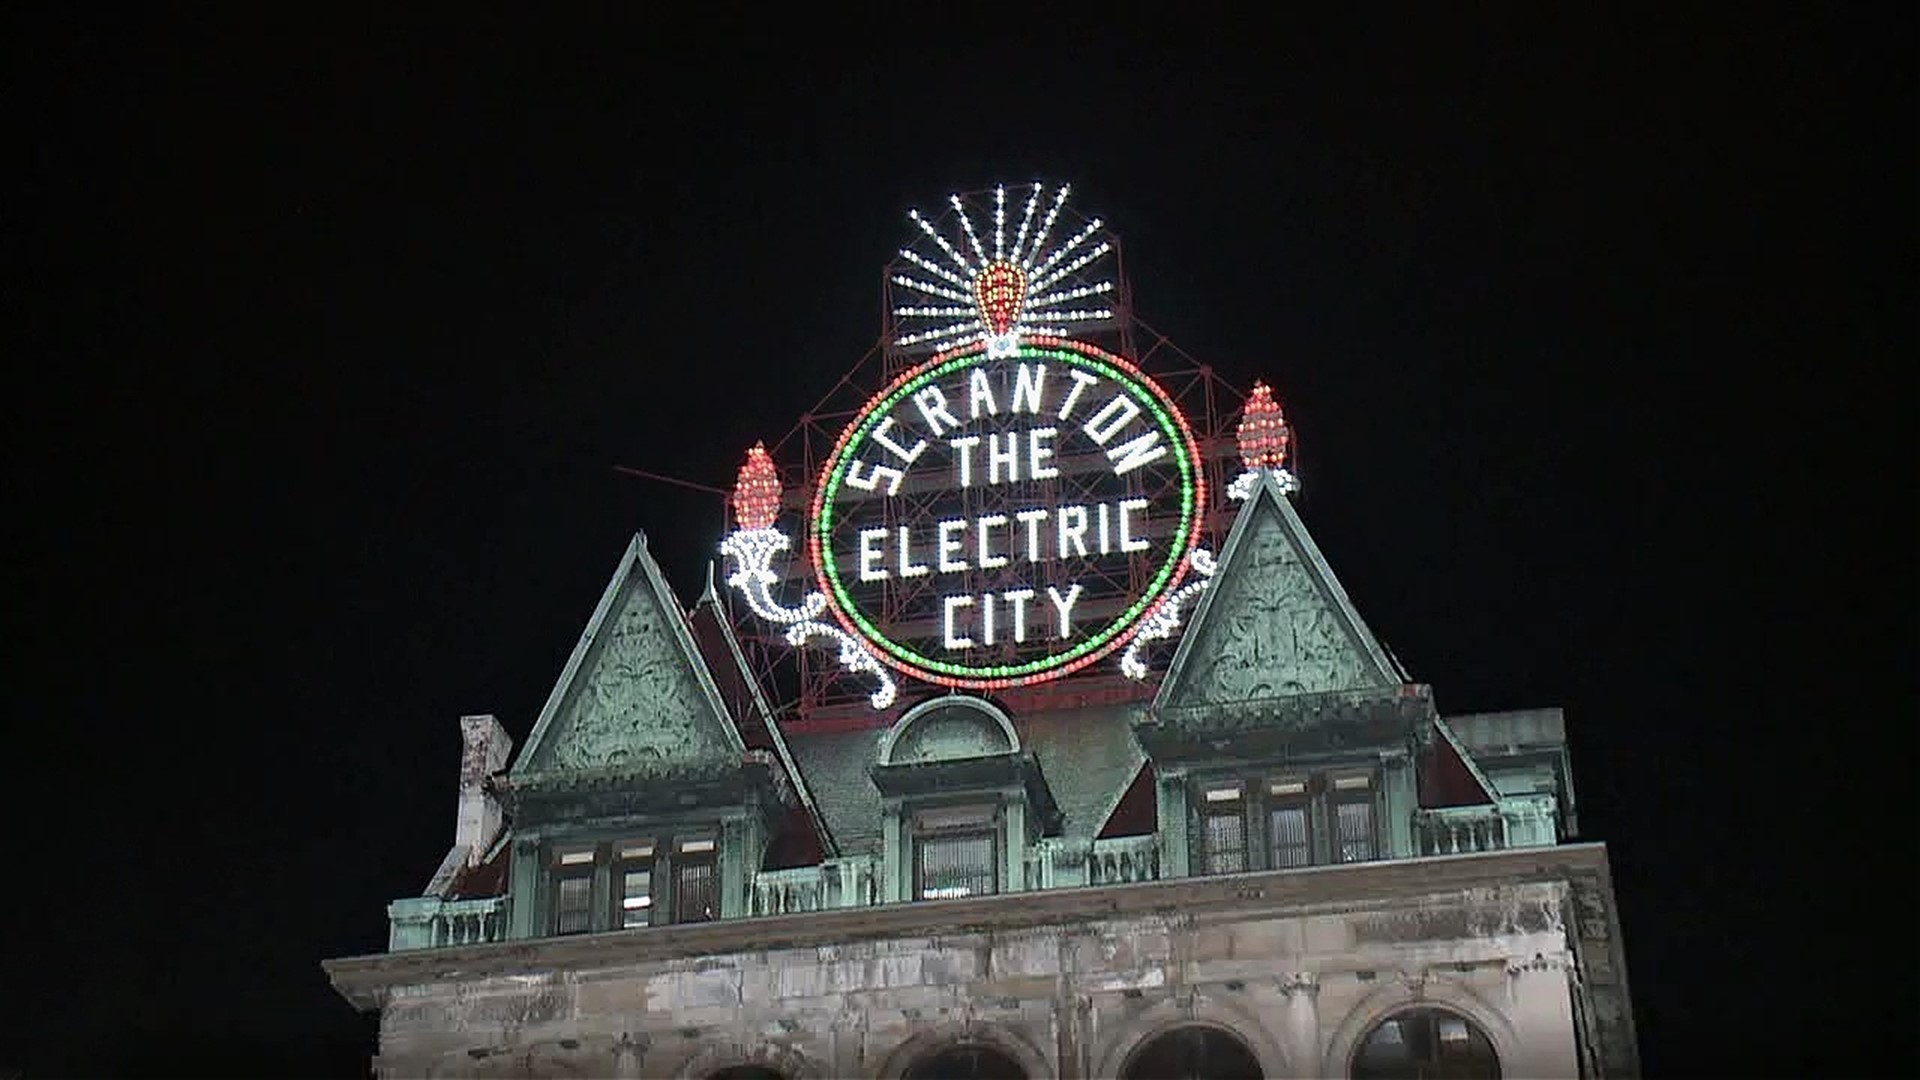 Scranton Electric City Building Getting New Owner